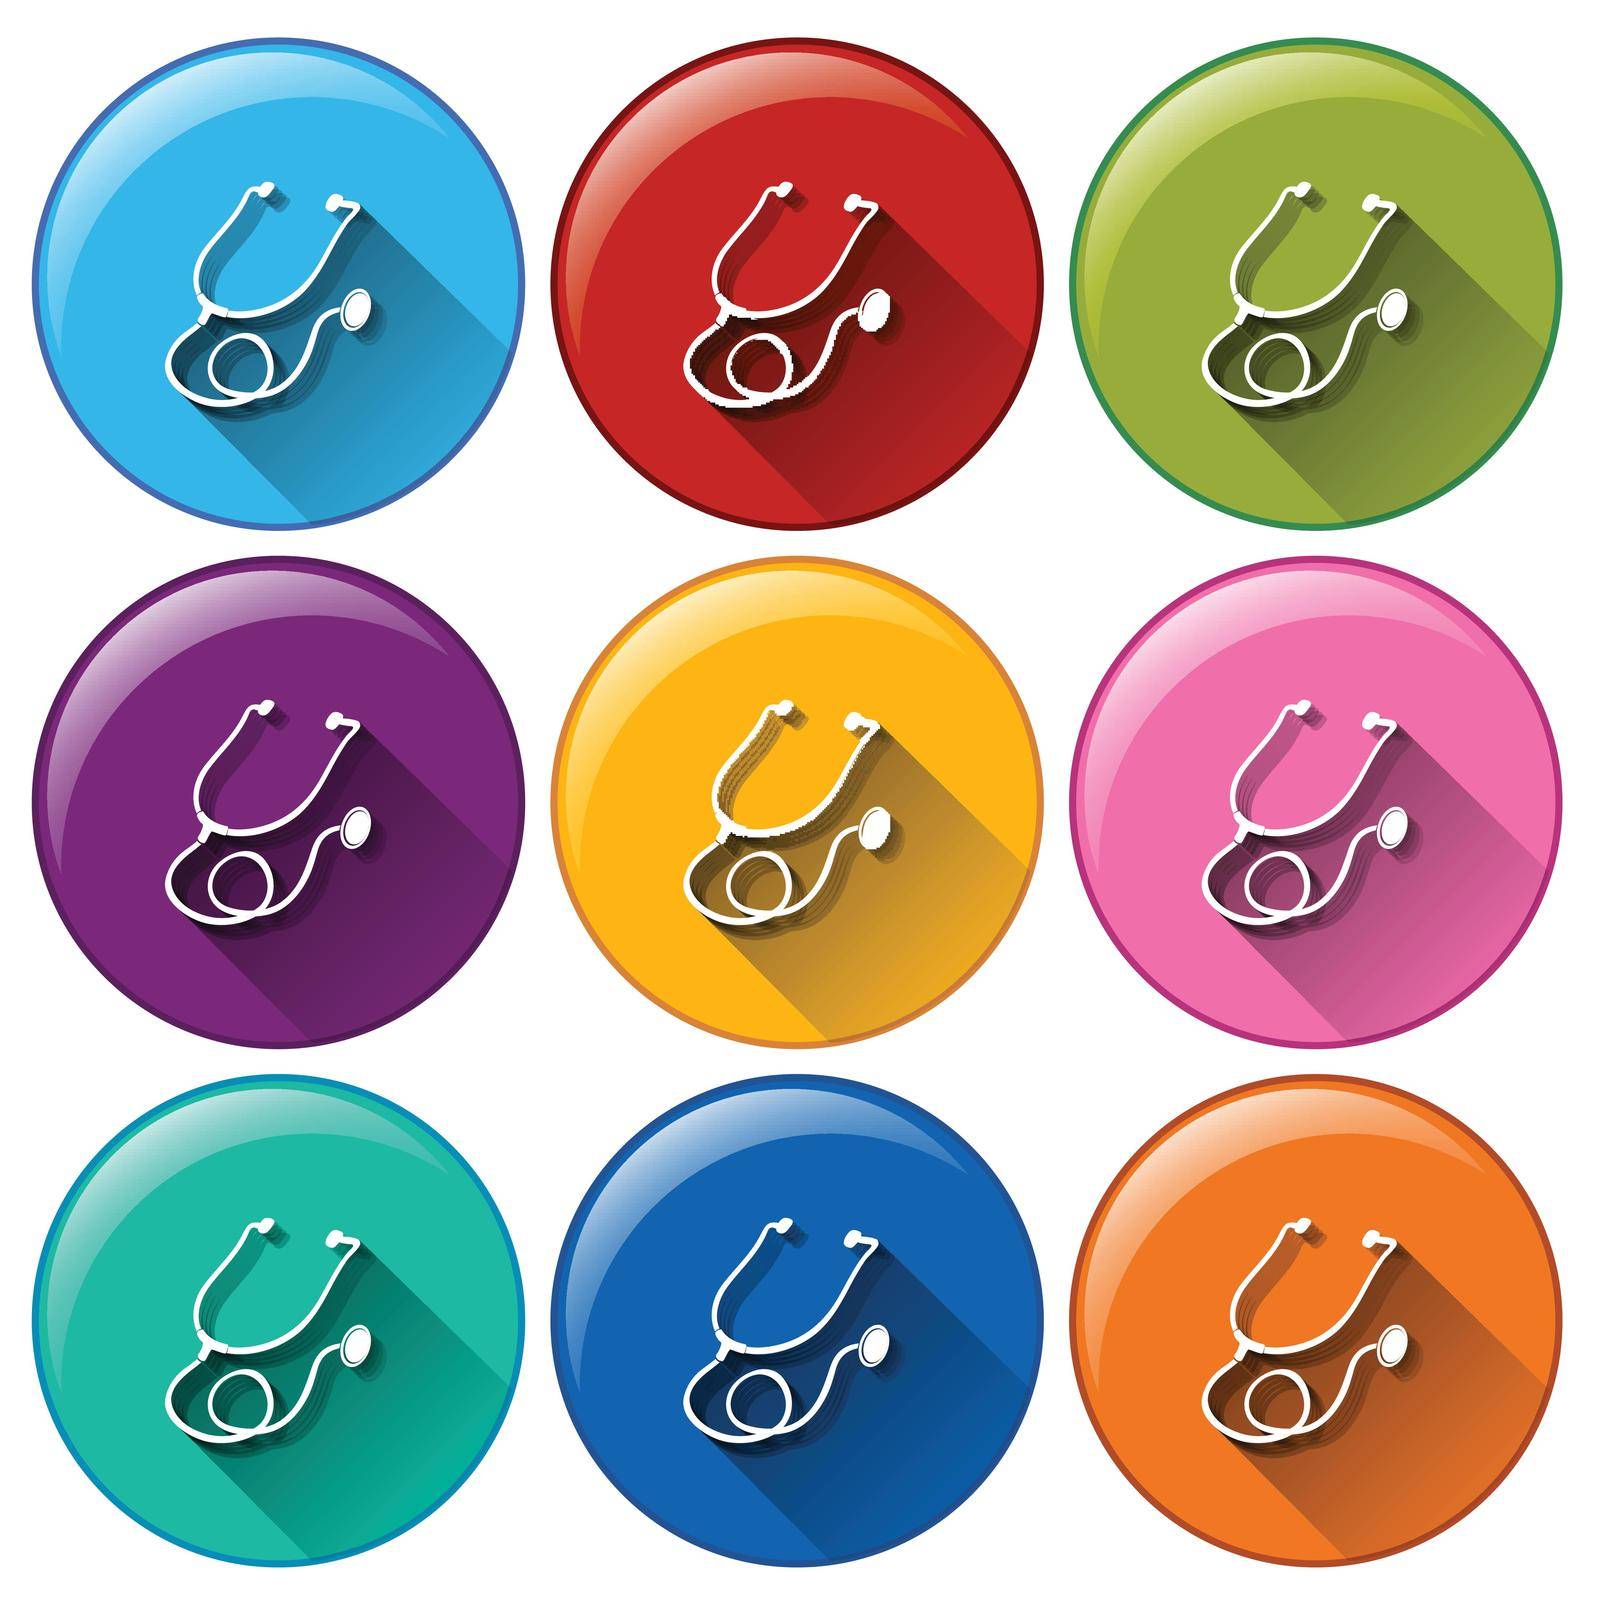 Illustration of the round buttons with stethoscopes on a white background